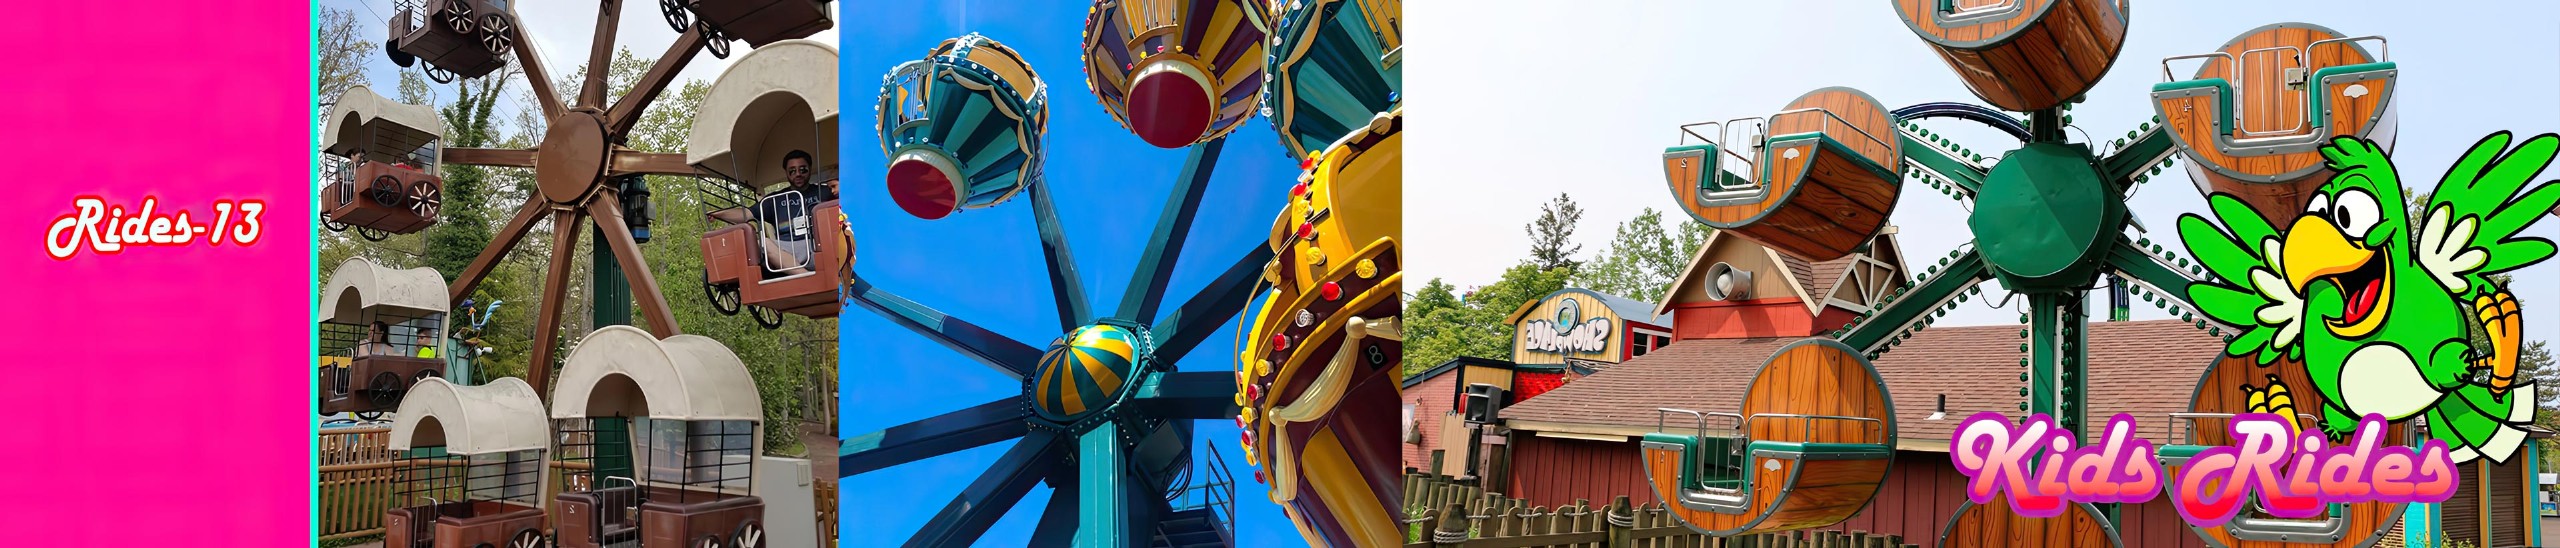 international attractions  rides rollercoasters for theme parks 13